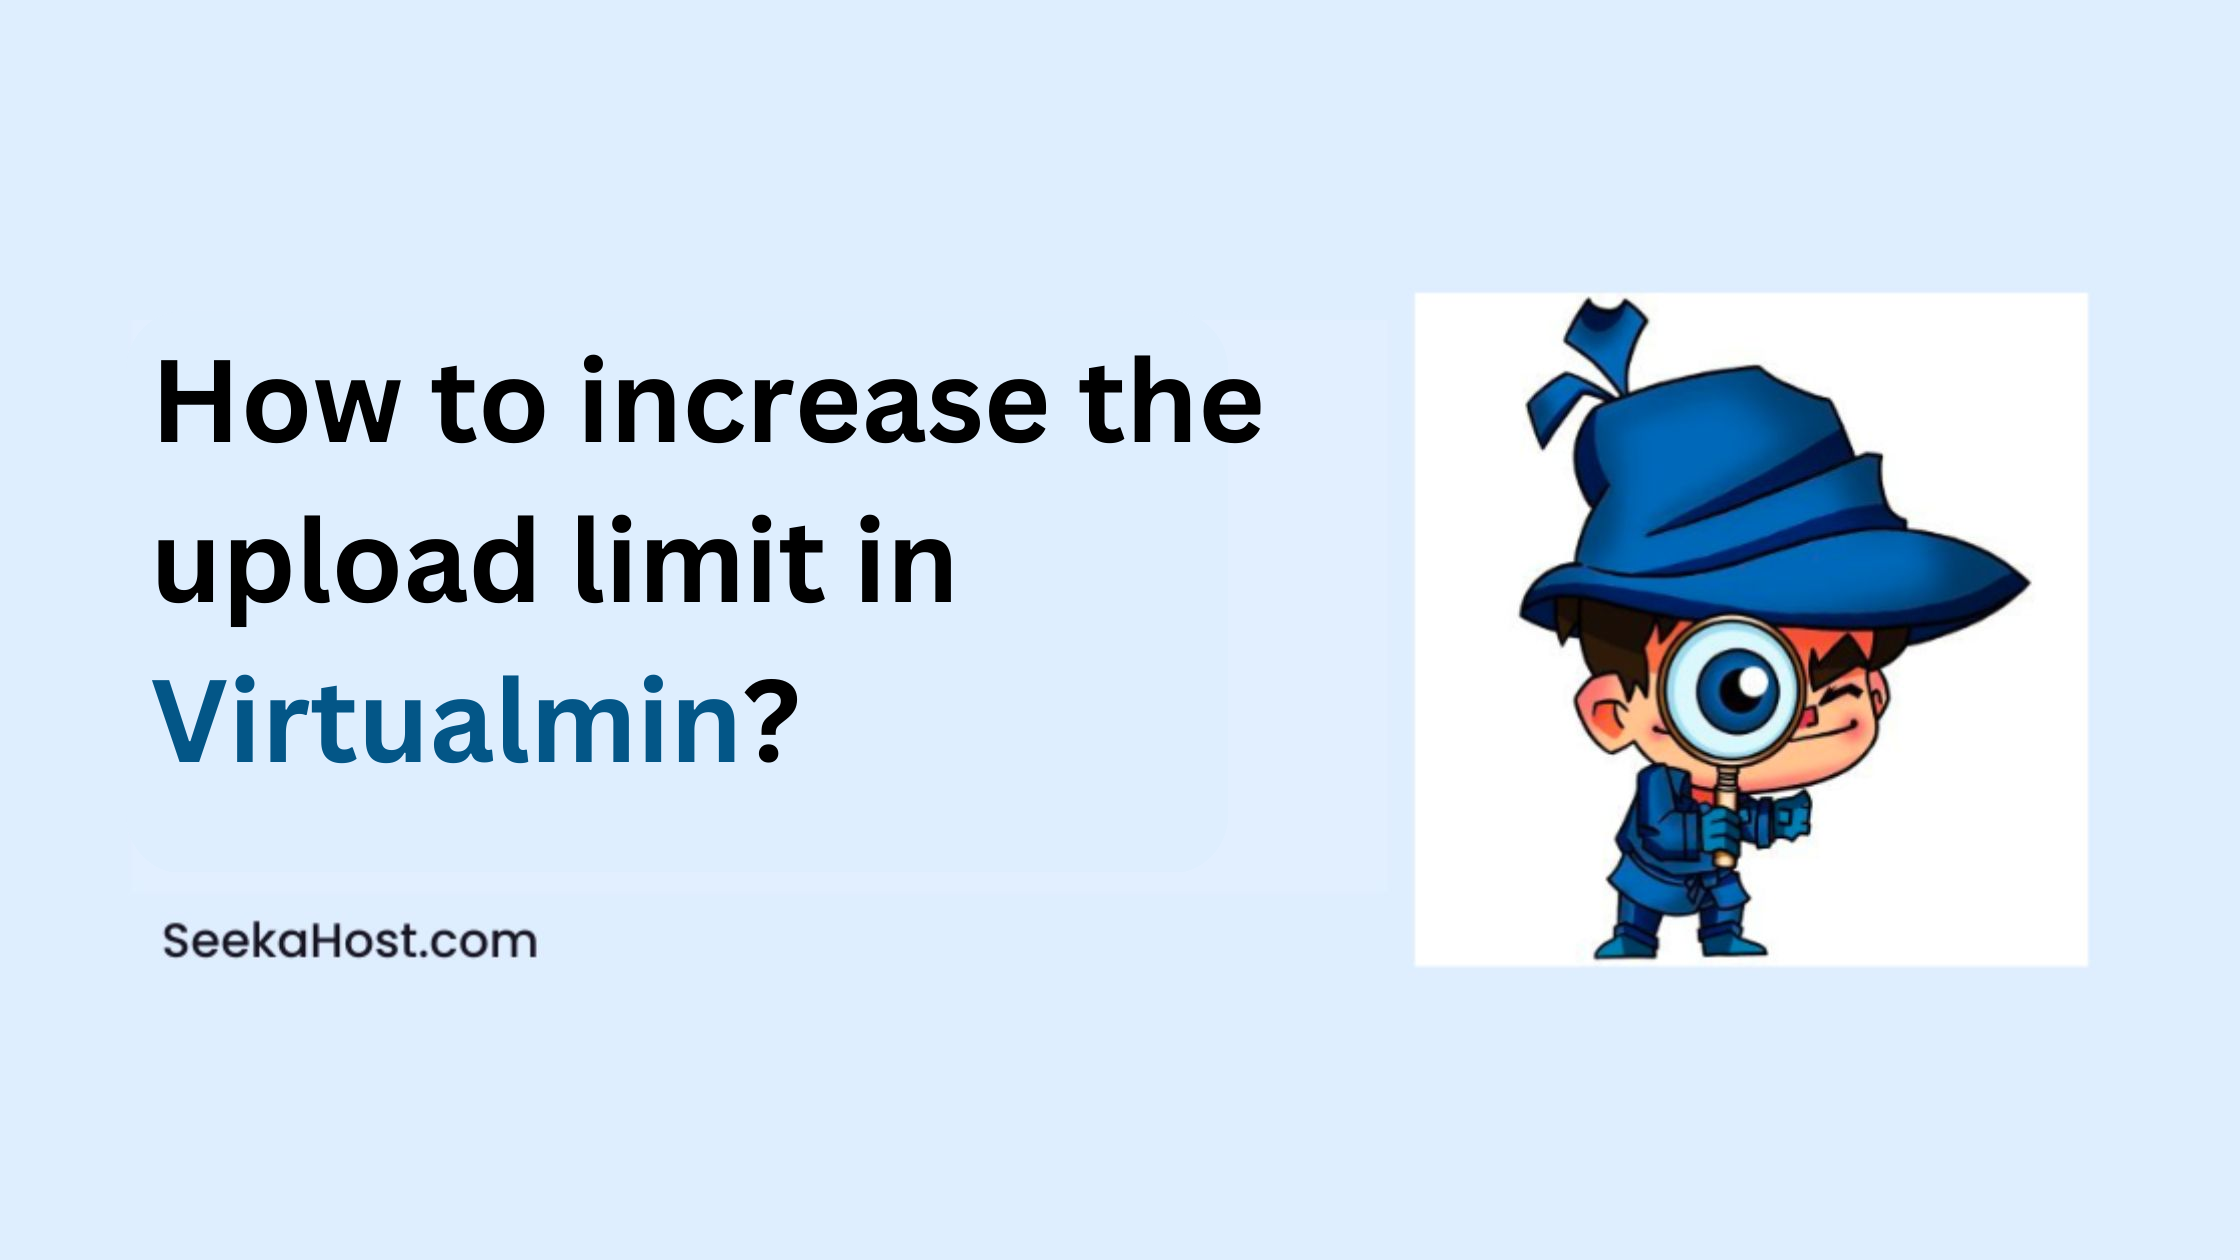 How to increase upload limit